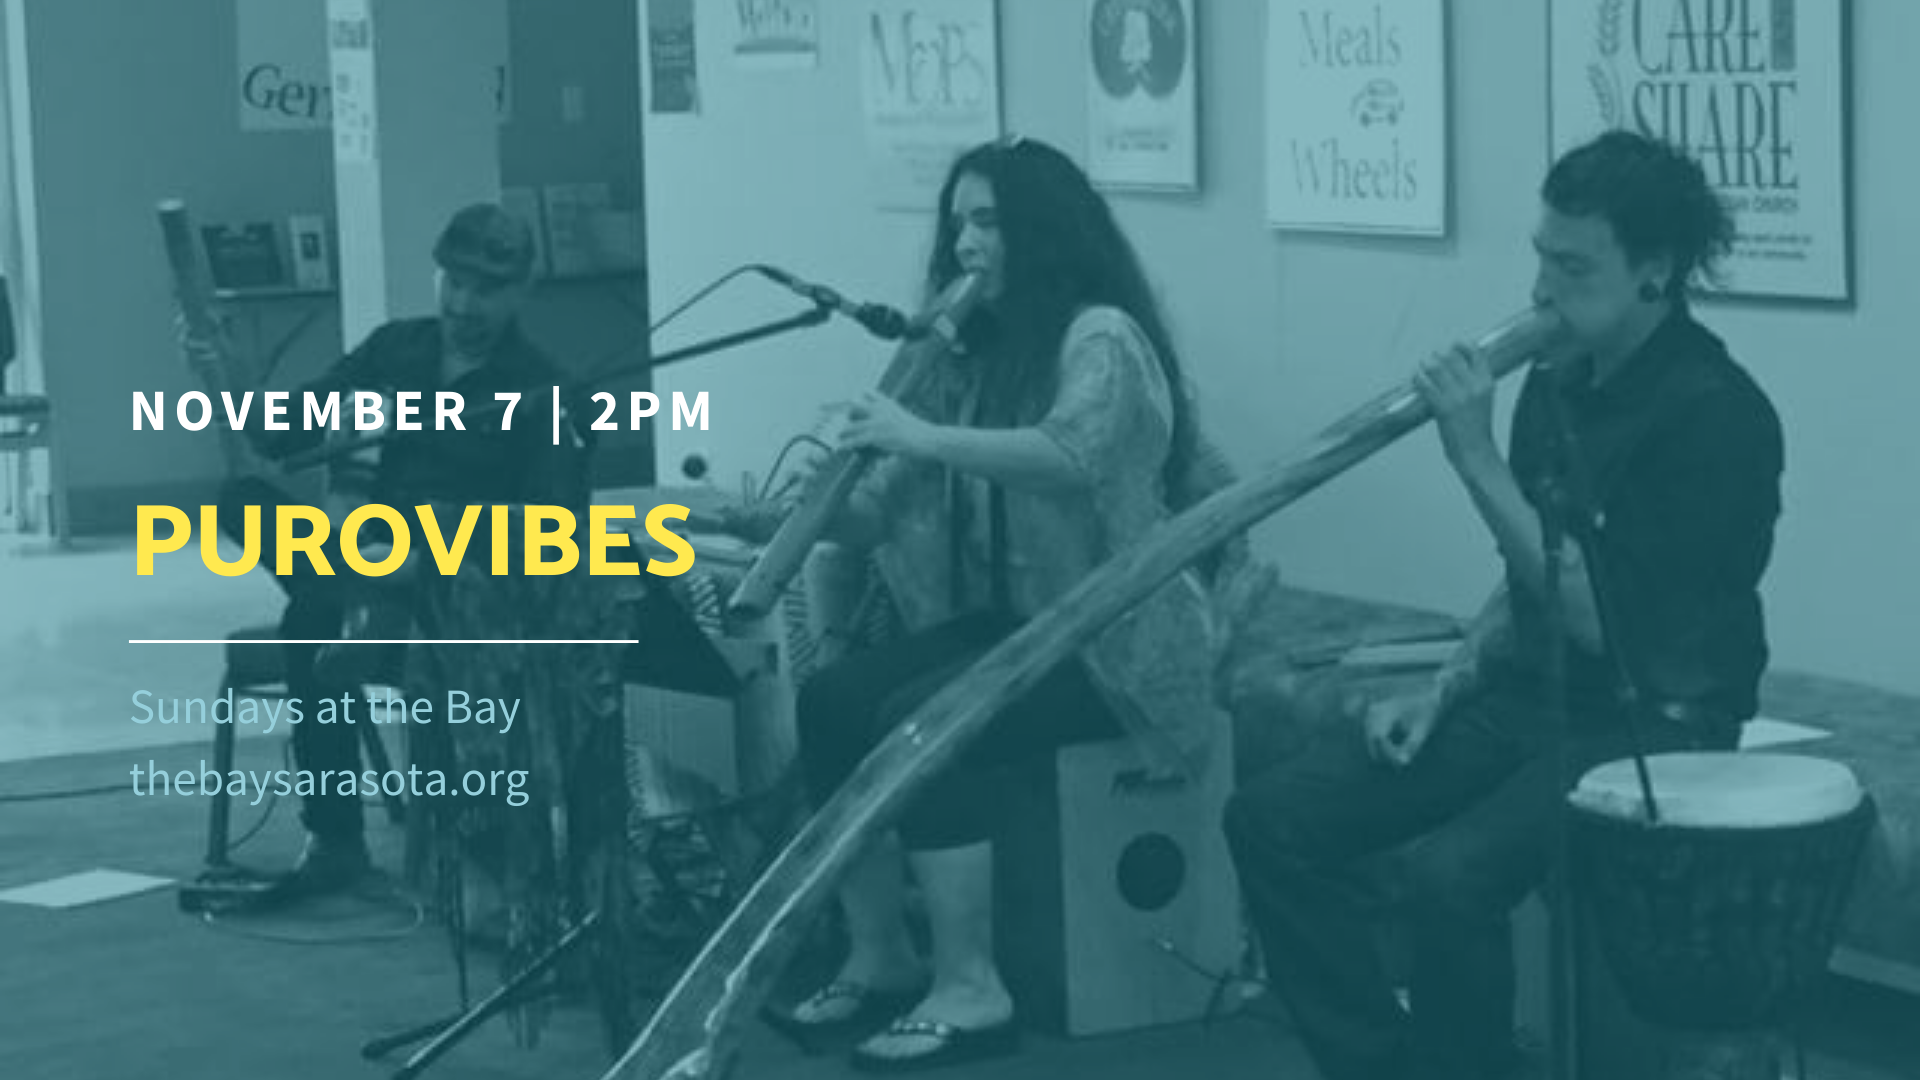 Event information for November 7th Sundays at the Bay event featuring PUROVIBES